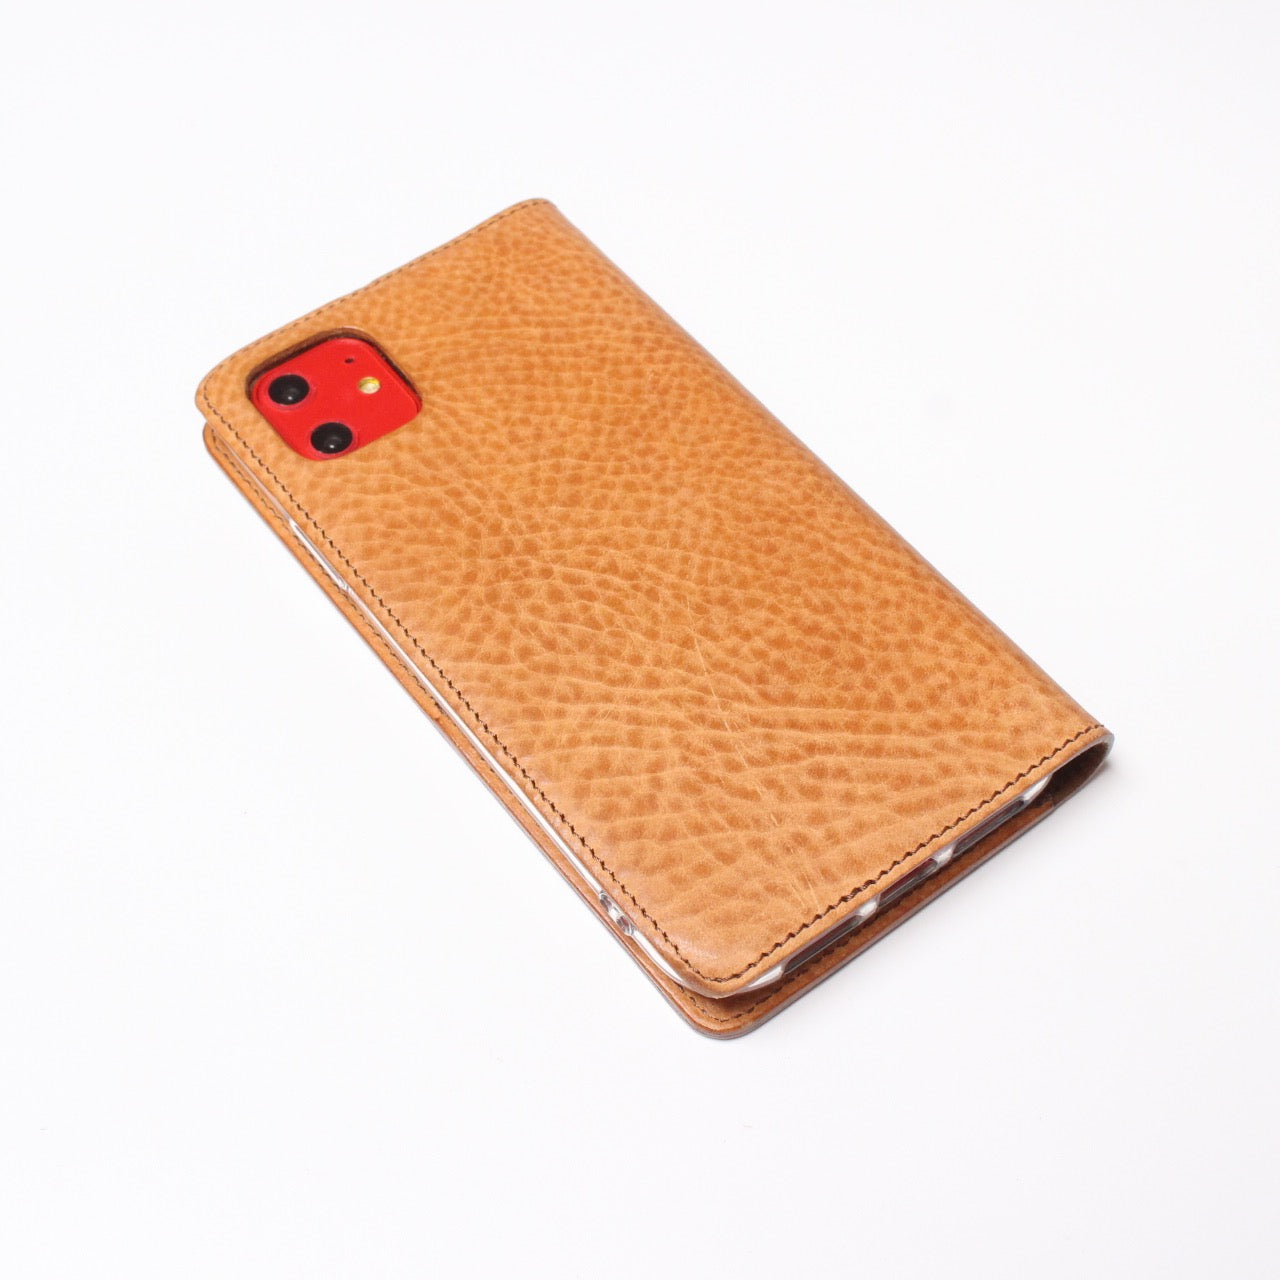 [Made to order] Smartphone case